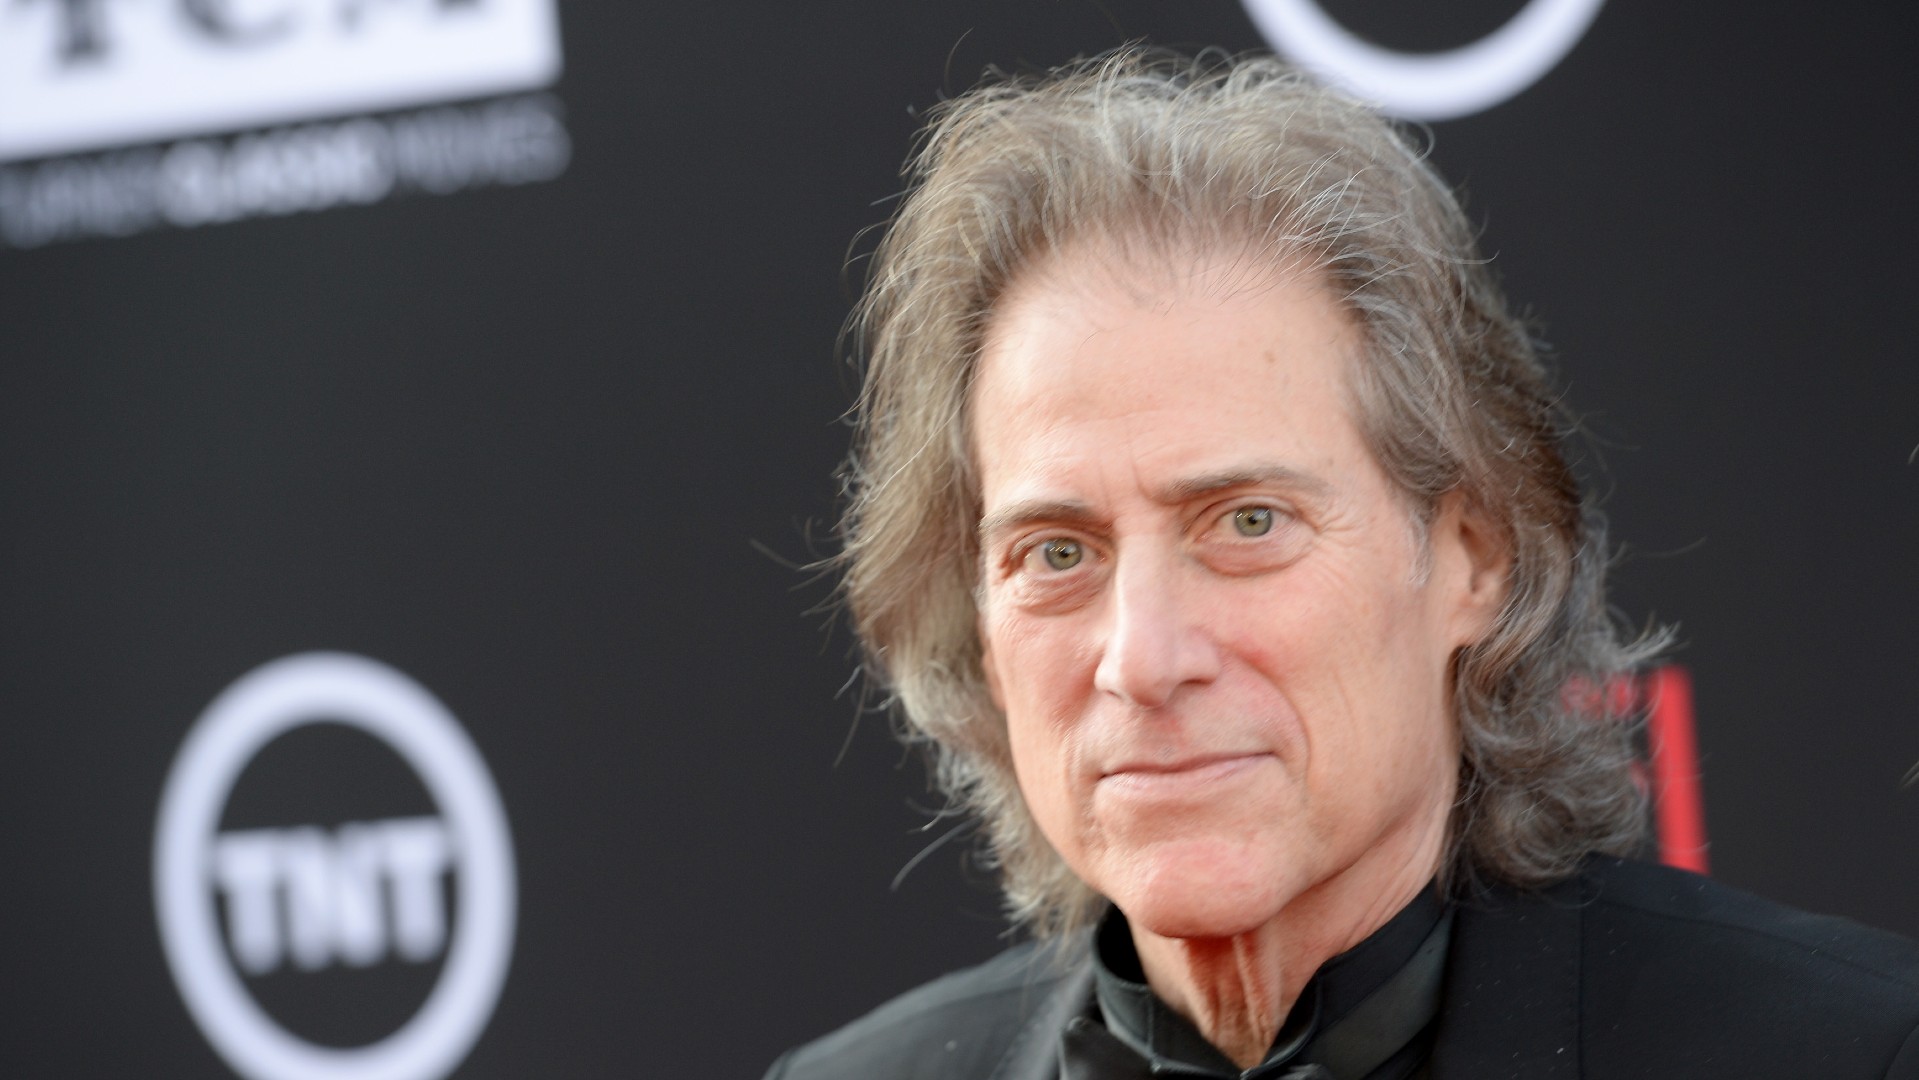 Comedian and actor Richard Lewis has died at the age of 76